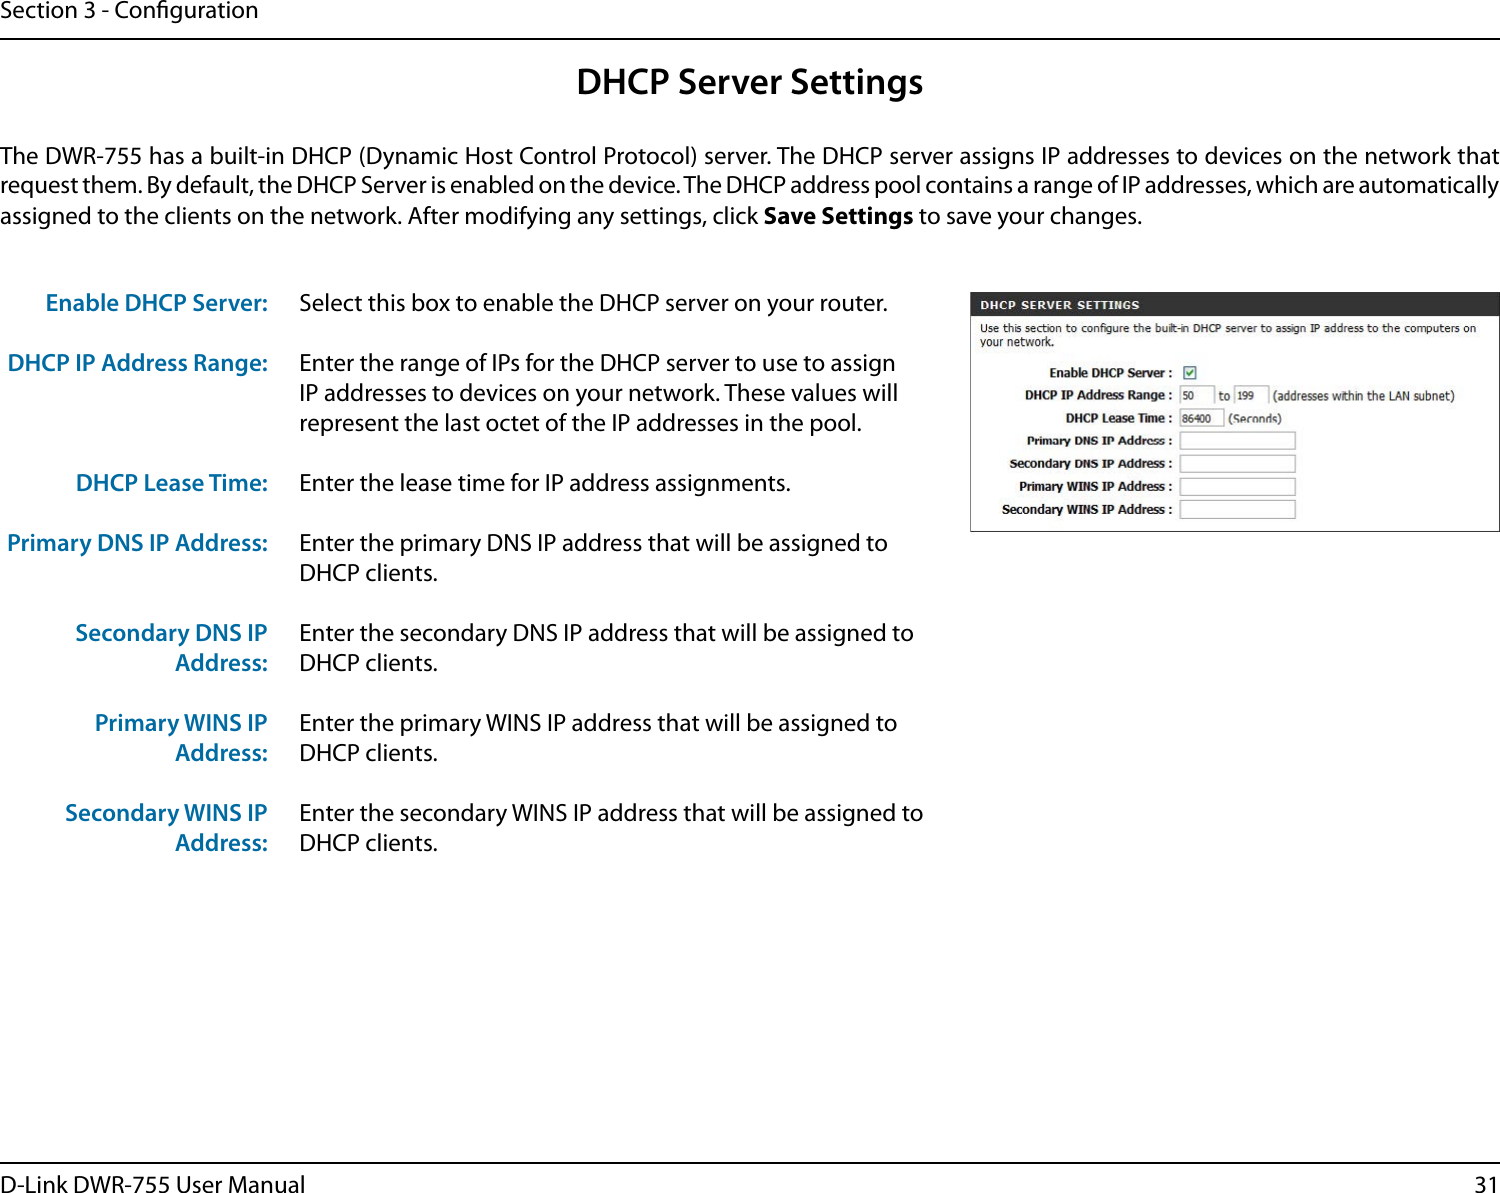 31D-Link DWR-755 User ManualSection 3 - CongurationSelect this box to enable the DHCP server on your router. Enter the range of IPs for the DHCP server to use to assign IP addresses to devices on your network. These values will represent the last octet of the IP addresses in the pool.Enter the lease time for IP address assignments.Enter the primary DNS IP address that will be assigned to DHCP clients.Enter the secondary DNS IP address that will be assigned to DHCP clients.Enter the primary WINS IP address that will be assigned to DHCP clients. Enter the secondary WINS IP address that will be assigned to DHCP clients.Enable DHCP Server:DHCP IP Address Range:DHCP Lease Time:Primary DNS IP Address:Secondary DNS IP Address:Primary WINS IP Address:Secondary WINS IP Address:DHCP Server SettingsThe DWR-755 has a built-in DHCP (Dynamic Host Control Protocol) server. The DHCP server assigns IP addresses to devices on the network that request them. By default, the DHCP Server is enabled on the device. The DHCP address pool contains a range of IP addresses, which are automatically assigned to the clients on the network. After modifying any settings, click Save Settings to save your changes.